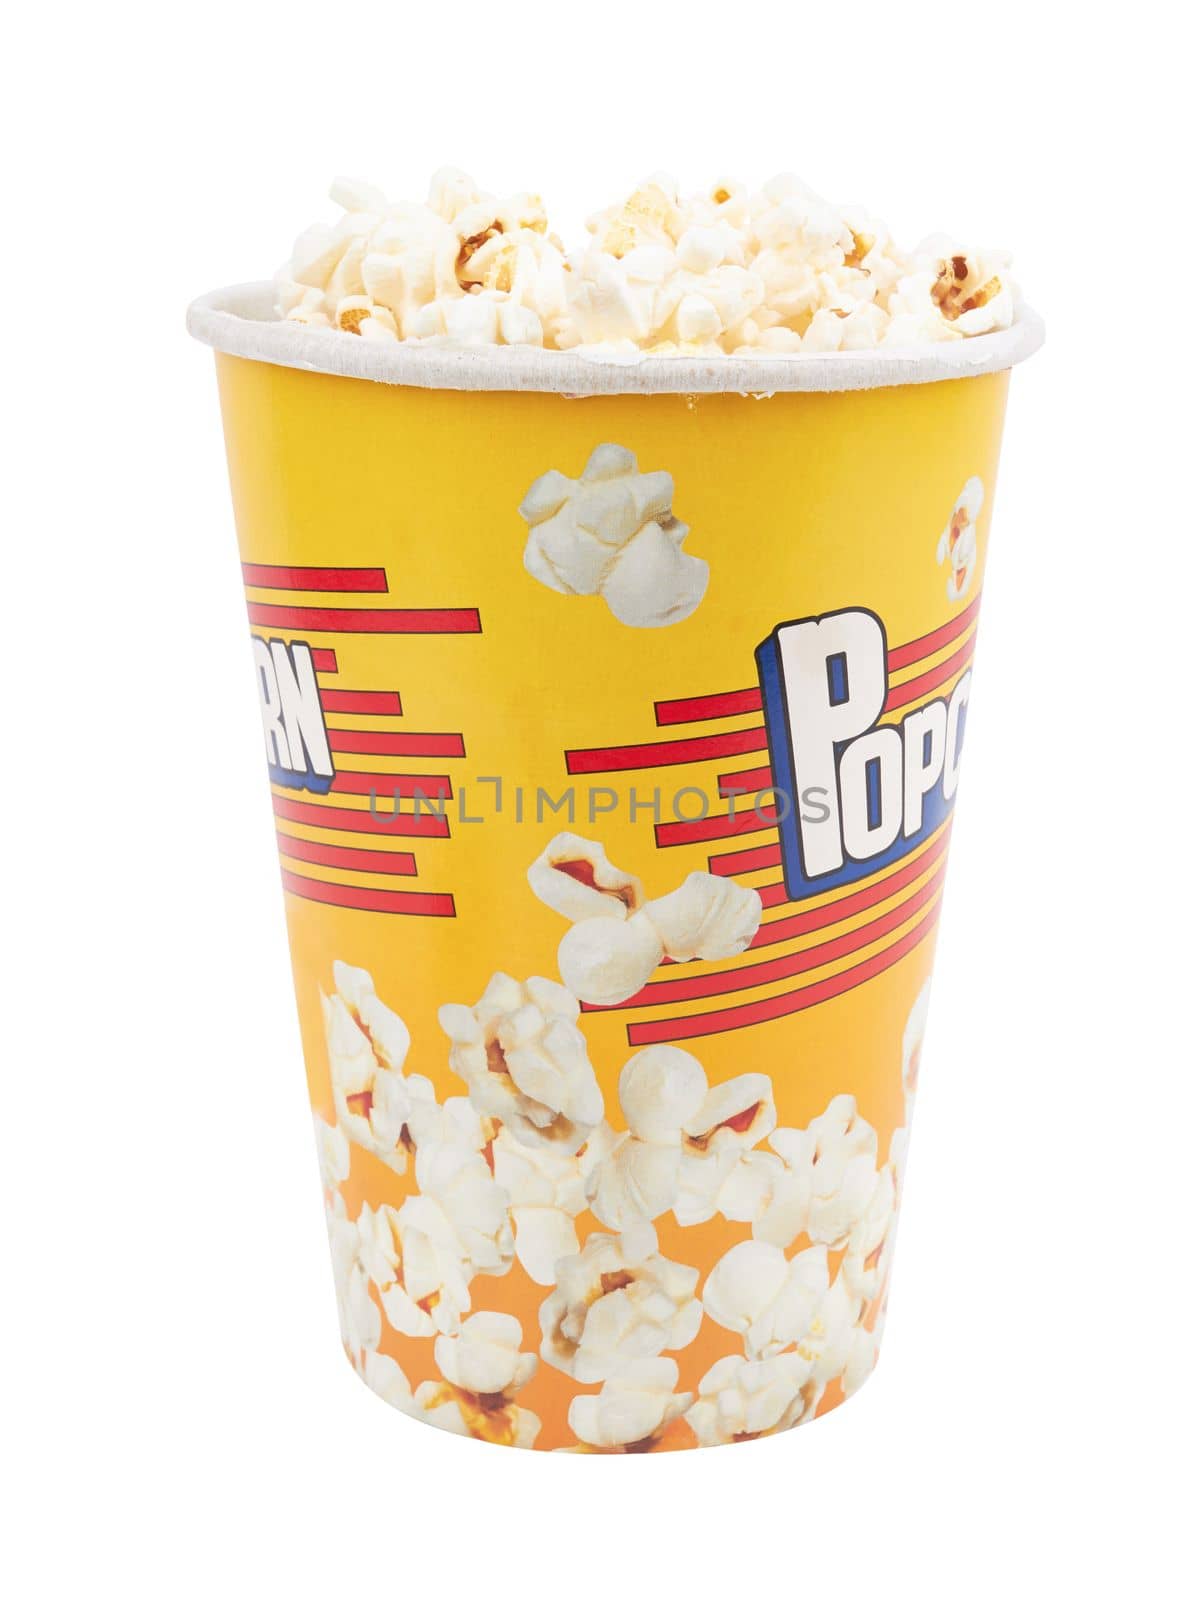 Popcorn in yellow bucket isolated on white background